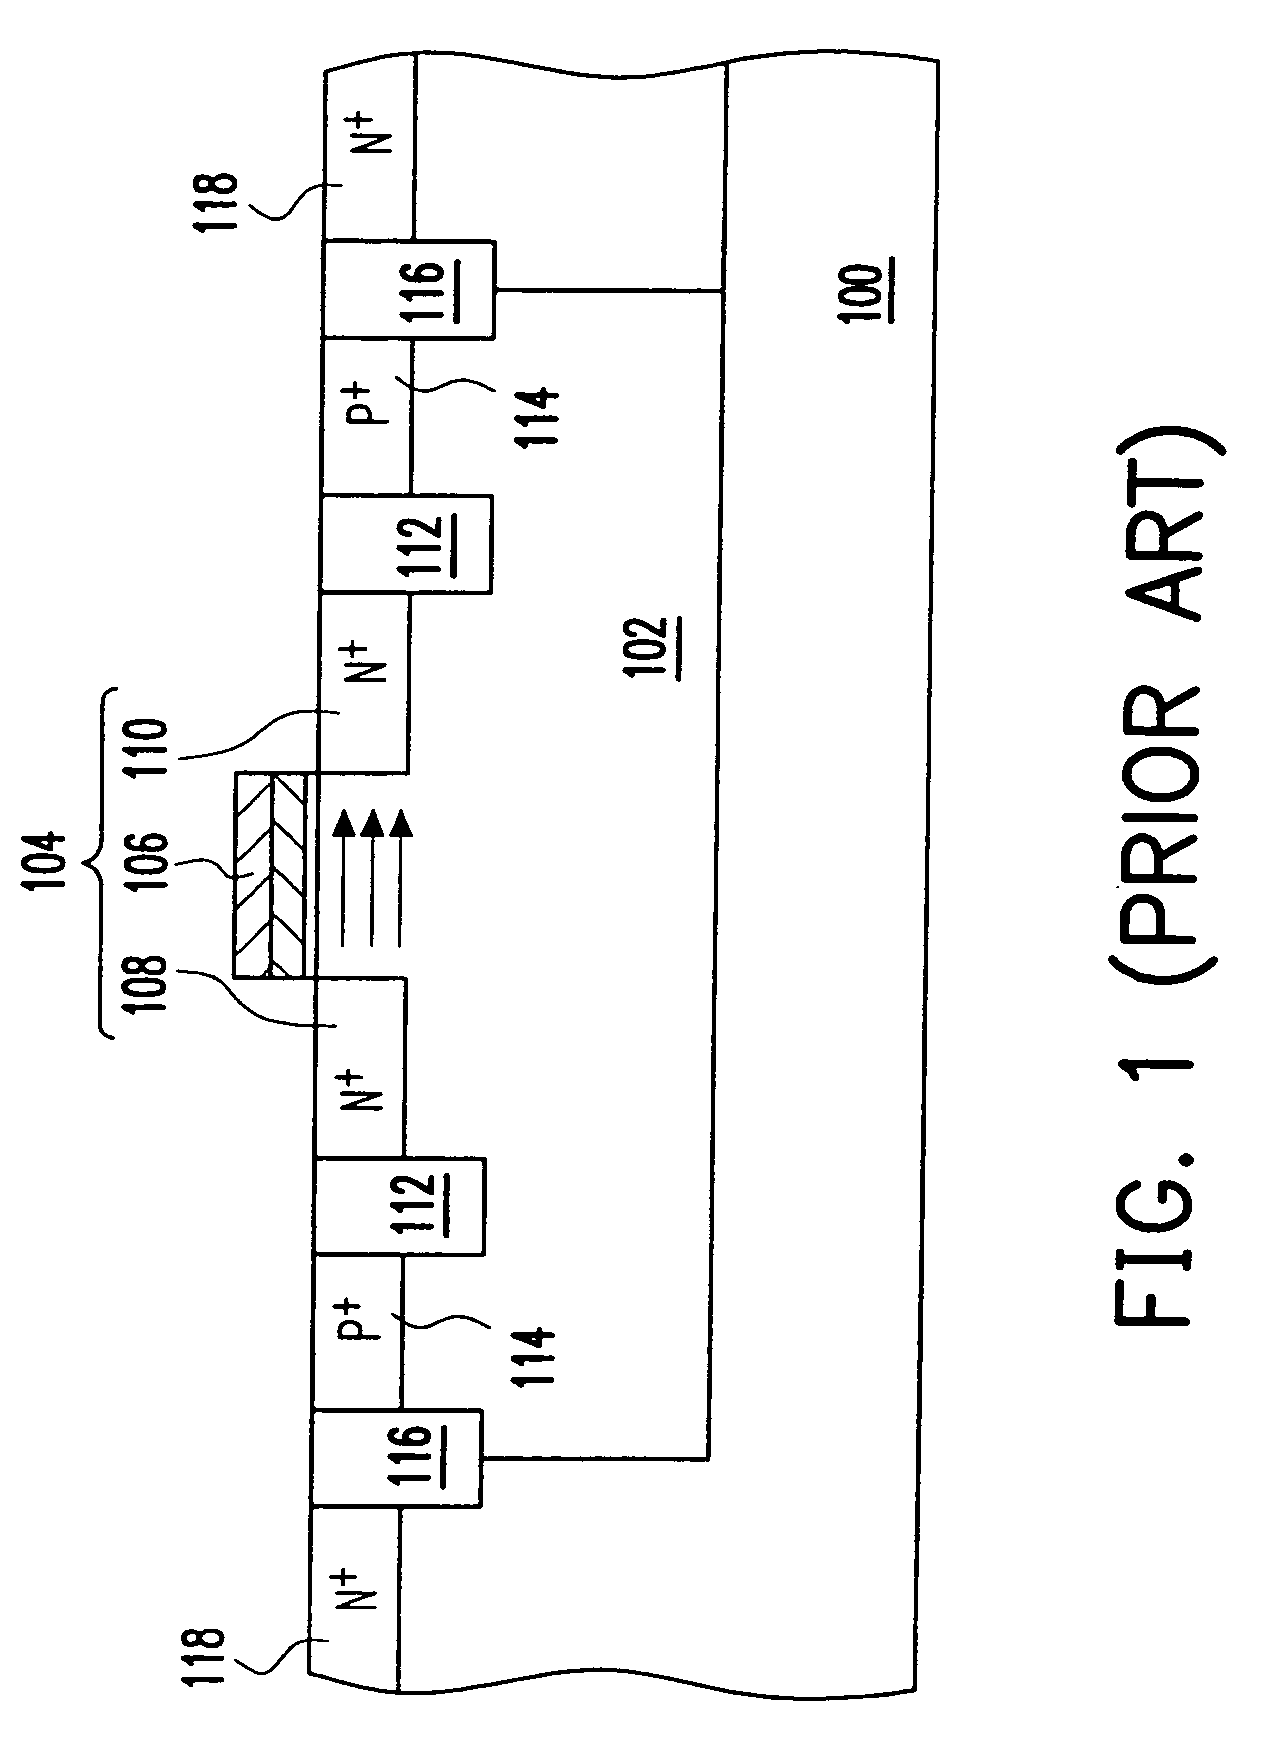 Structure and fabrication method of electrostatic discharge protection circuit